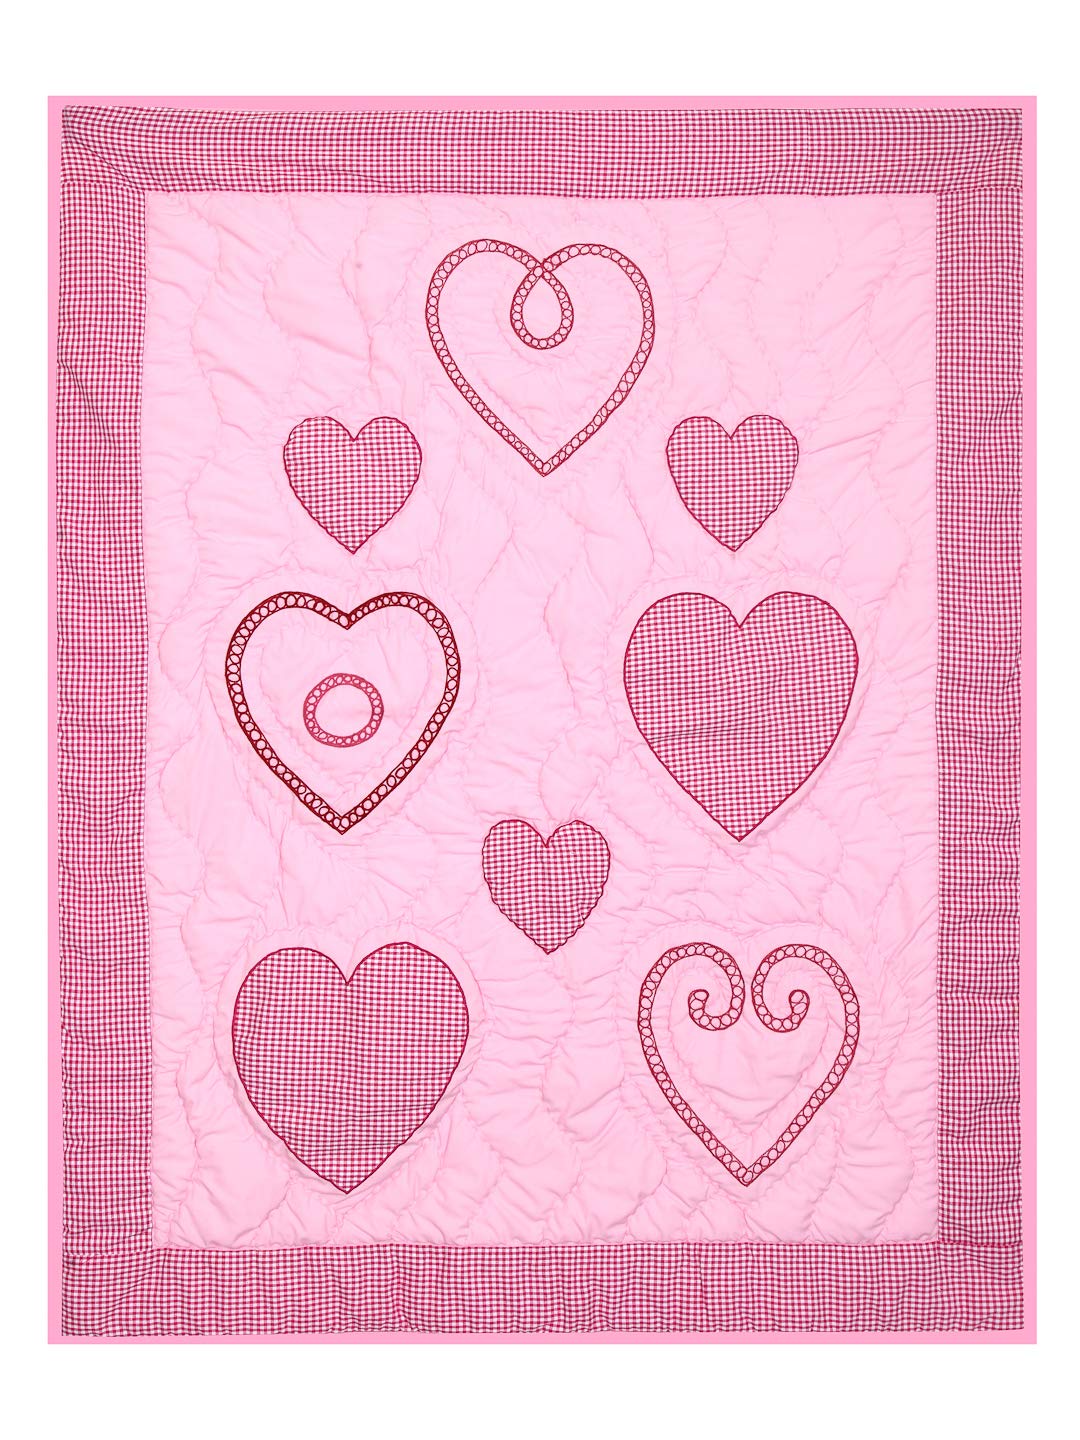 Chic Home Premium Cotton Softest Baby Blanket Quilt 04-10 Years (Hearts) - SWHF